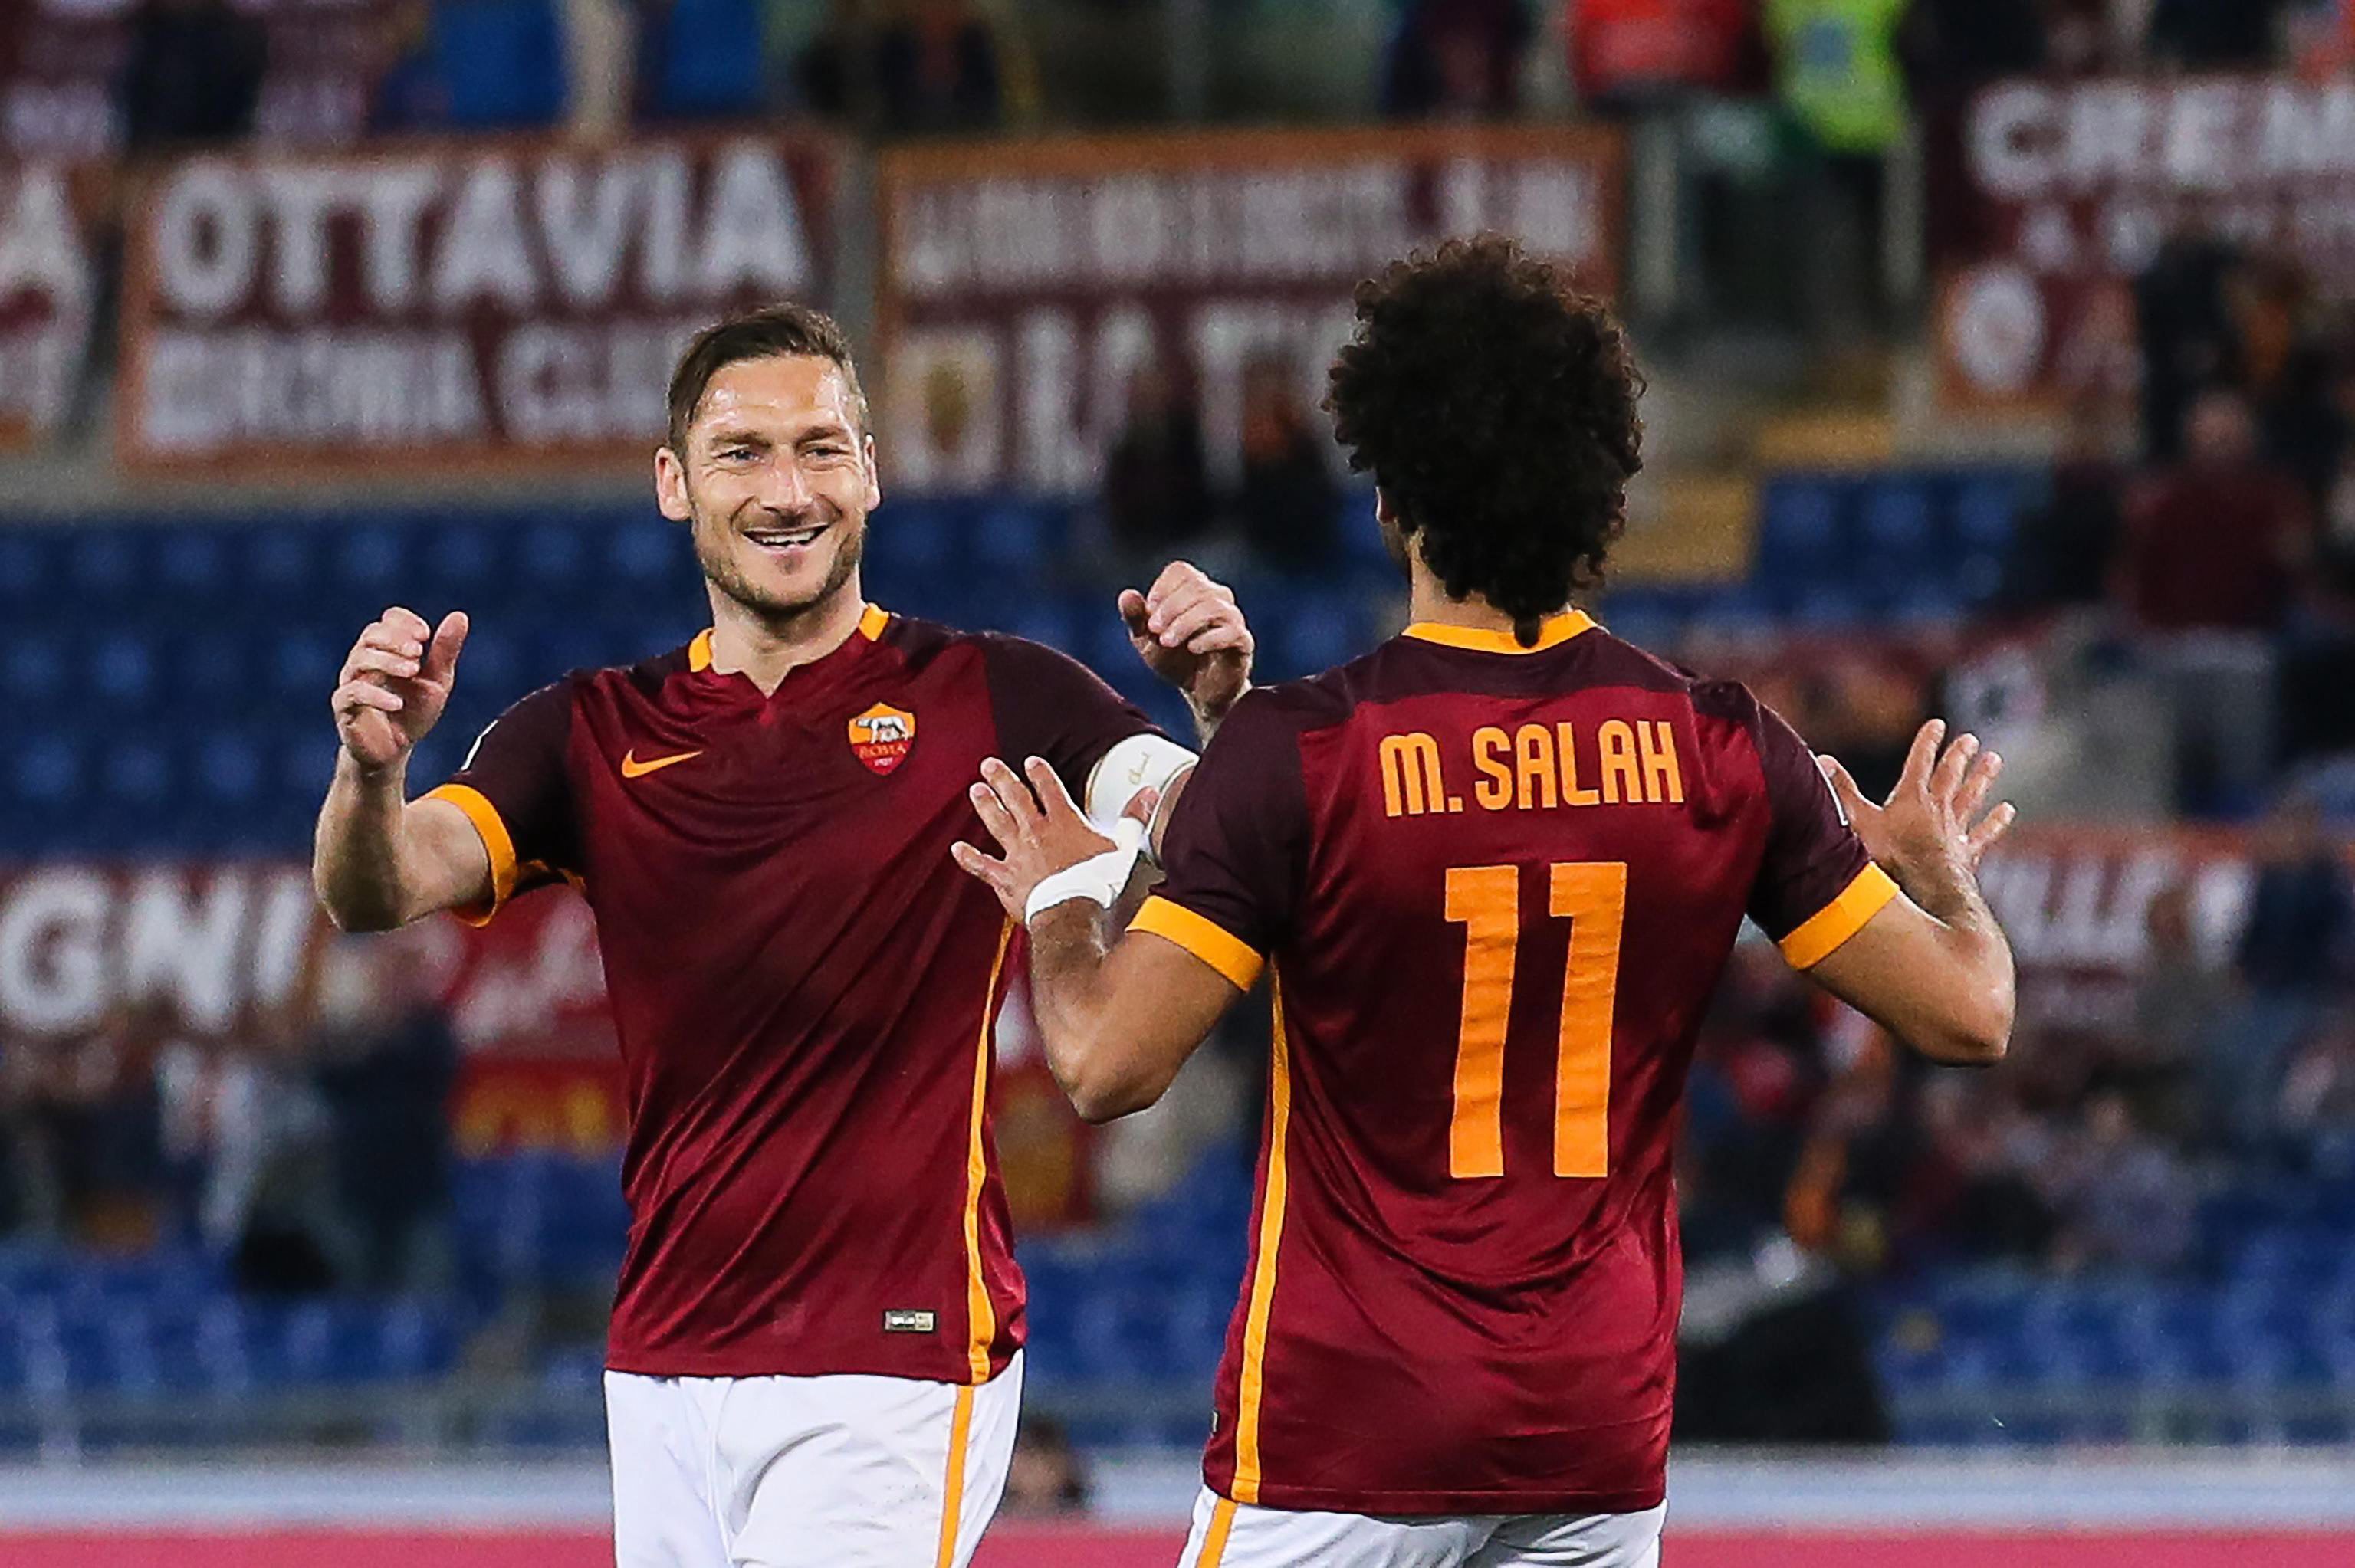 Roma's Mohamed Salah (R) celebrates scoring the 1-1 equaliser goal with Francesco Totti (L) during the Italian Serie A soccer match between AS Roma and FC Bologna at the Olimpico stadium in Rome, Italy, 11 April 2016.  (Photo by Alessandro Di Meo/EPA)